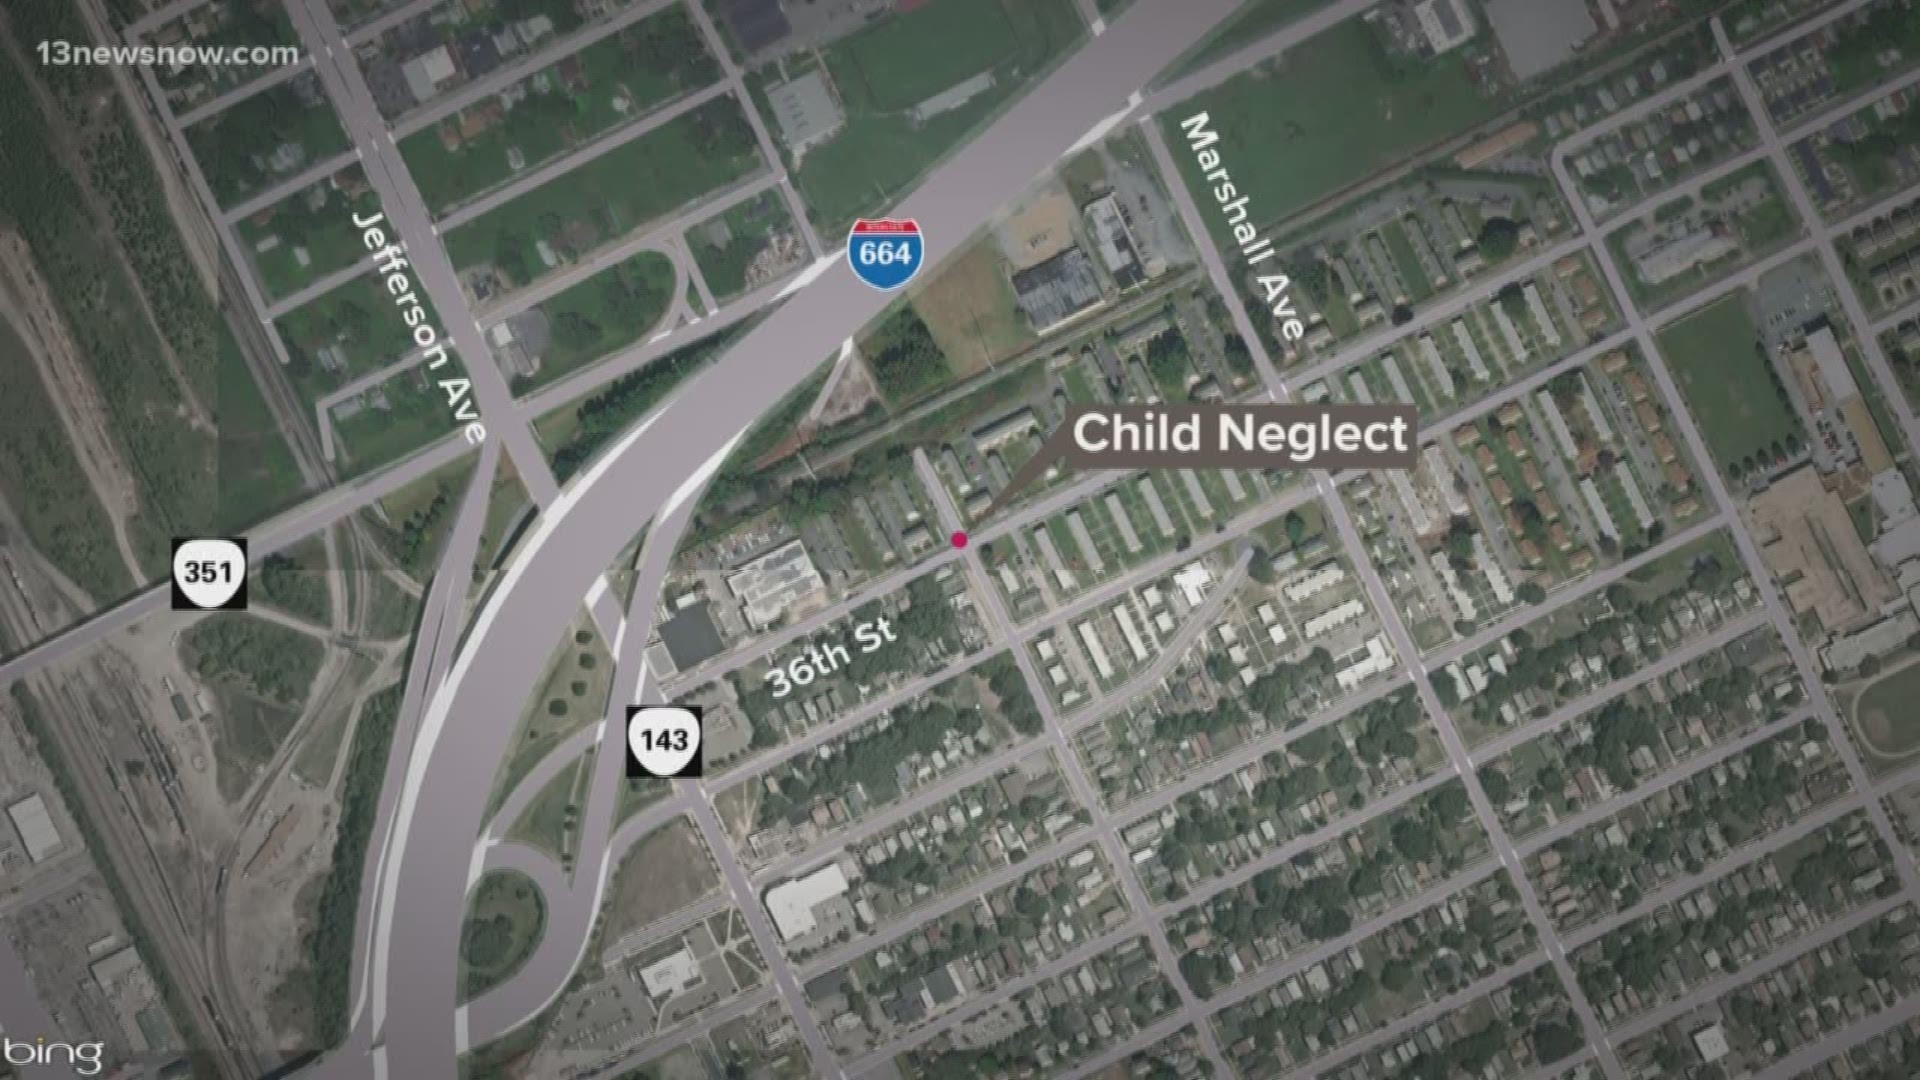 Police are investigating a case of possible child neglect after a young child nearly drowned in a bathtub.